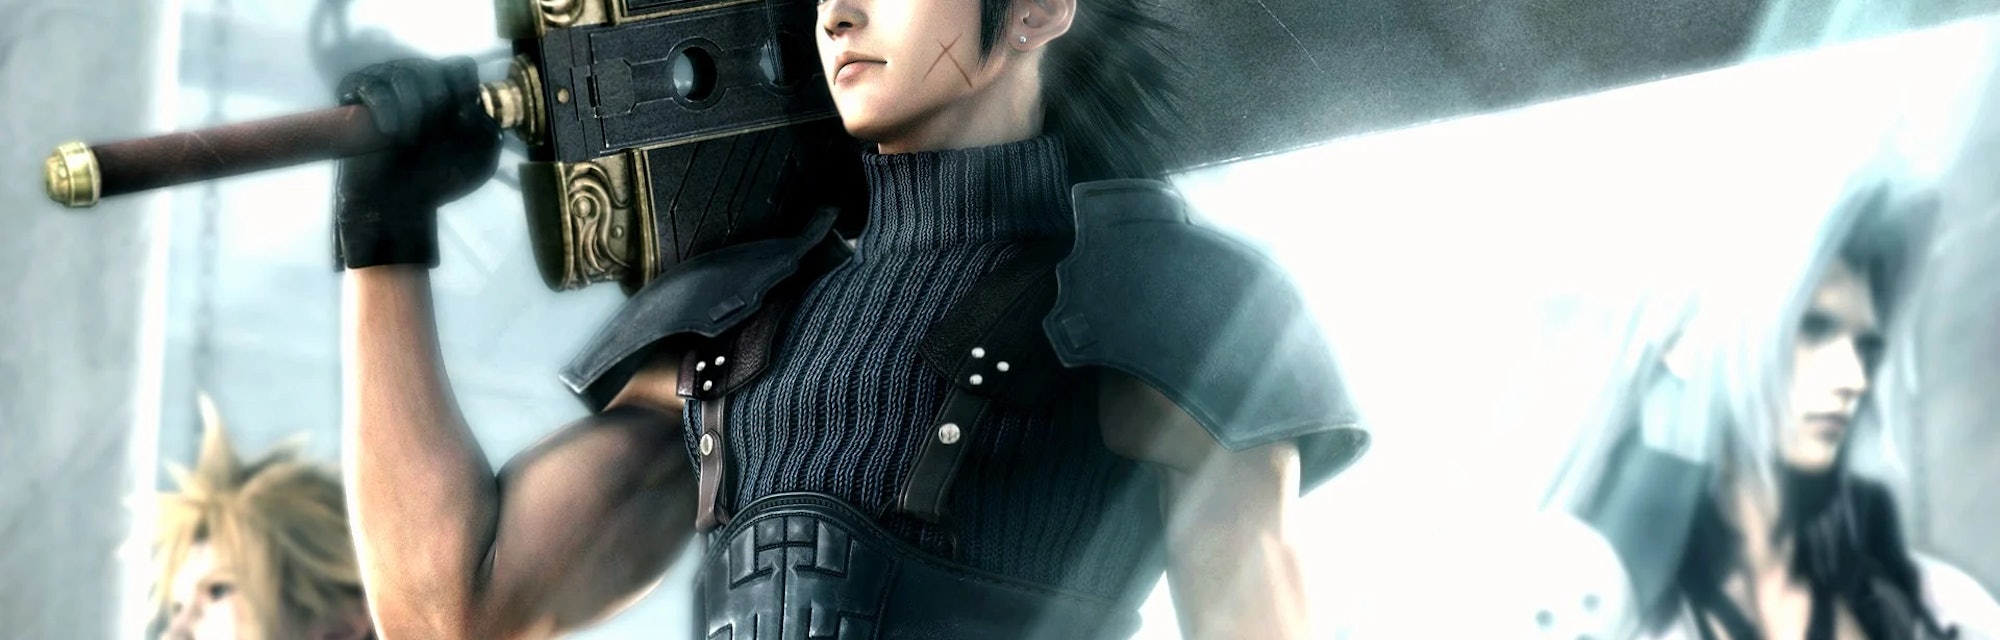 Ff7 Remake Spoilers Will Zack Fair And Crisis Core Story Elements Appear